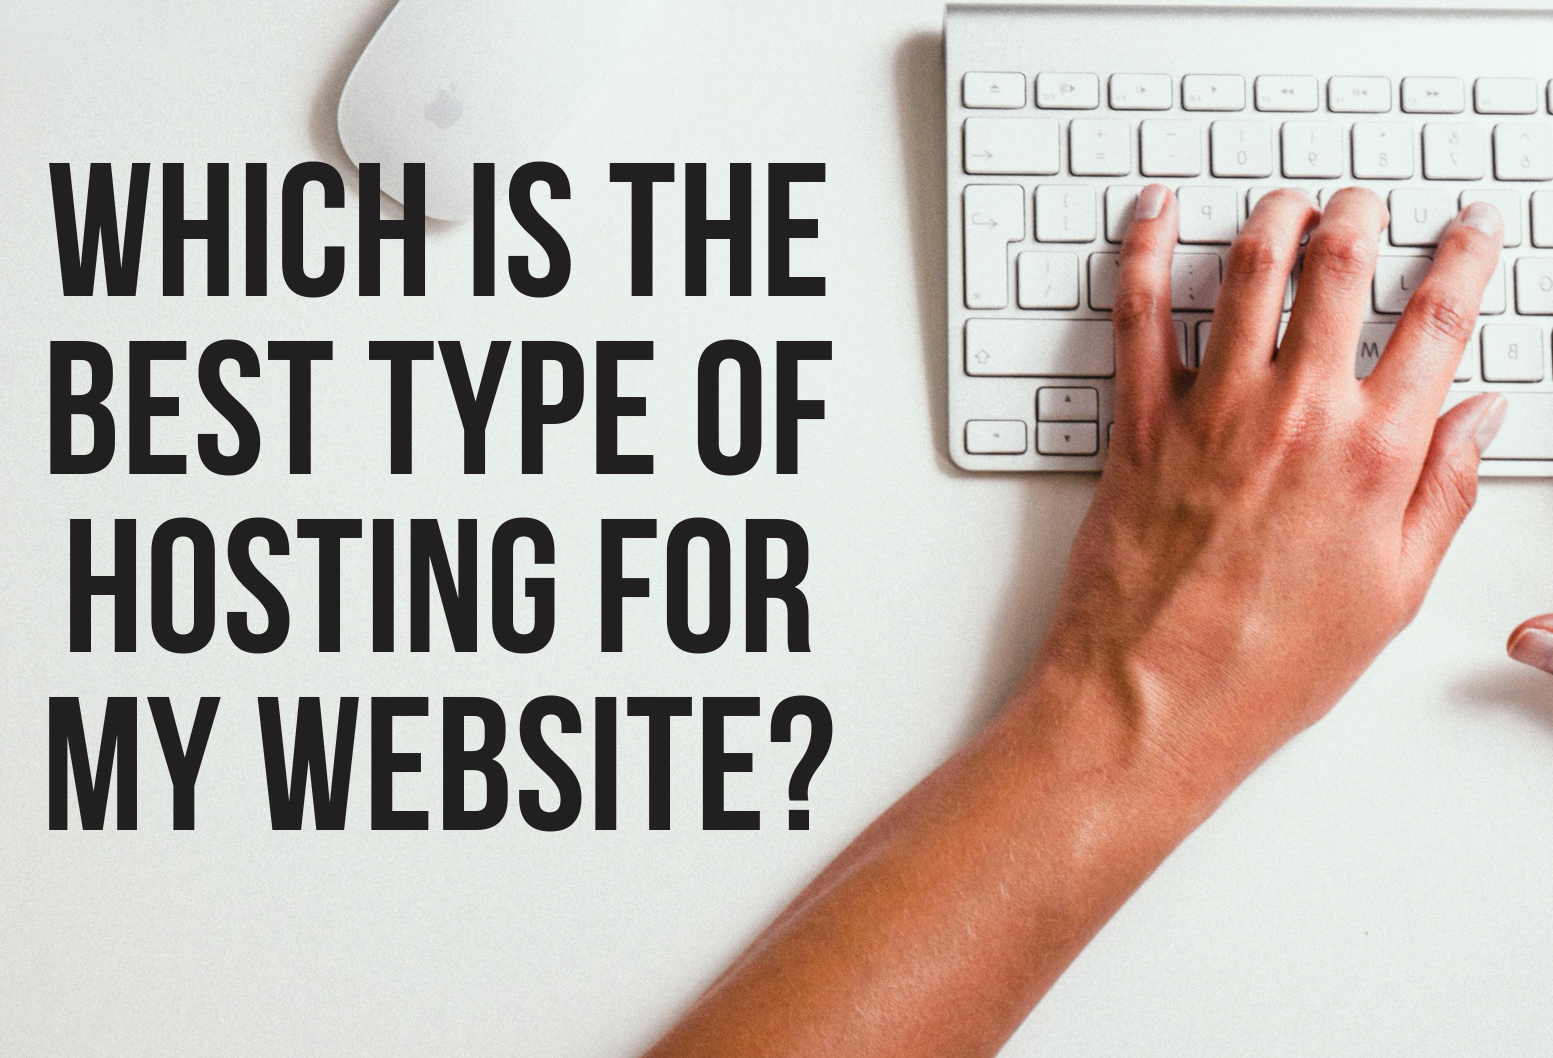 Which is the Best Type of Hosting for My Website?